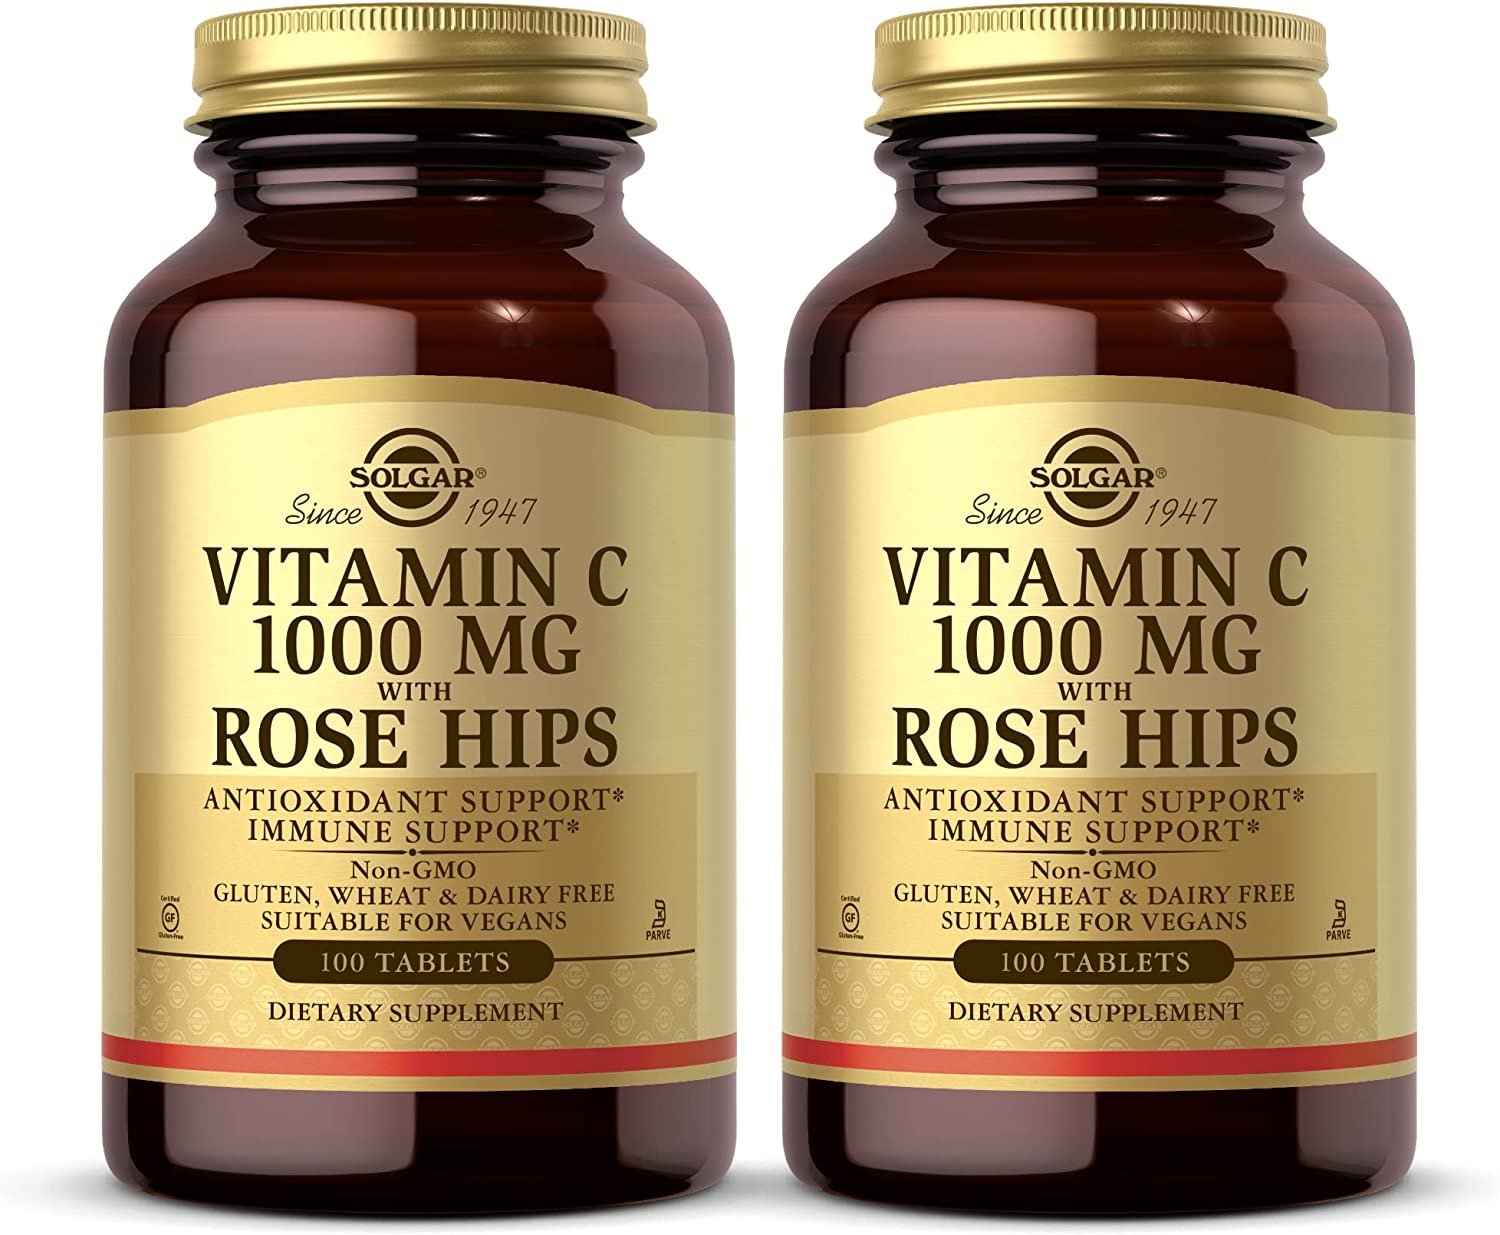 Solgar Vitamin C 1000 mg with Rose Hips - 100 Tablets, Pack of 2 - Antioxidant & Immune Support - Non GMO, Vegan, Gluten Free, Dairy Free, Kosher - 200 Total Servings